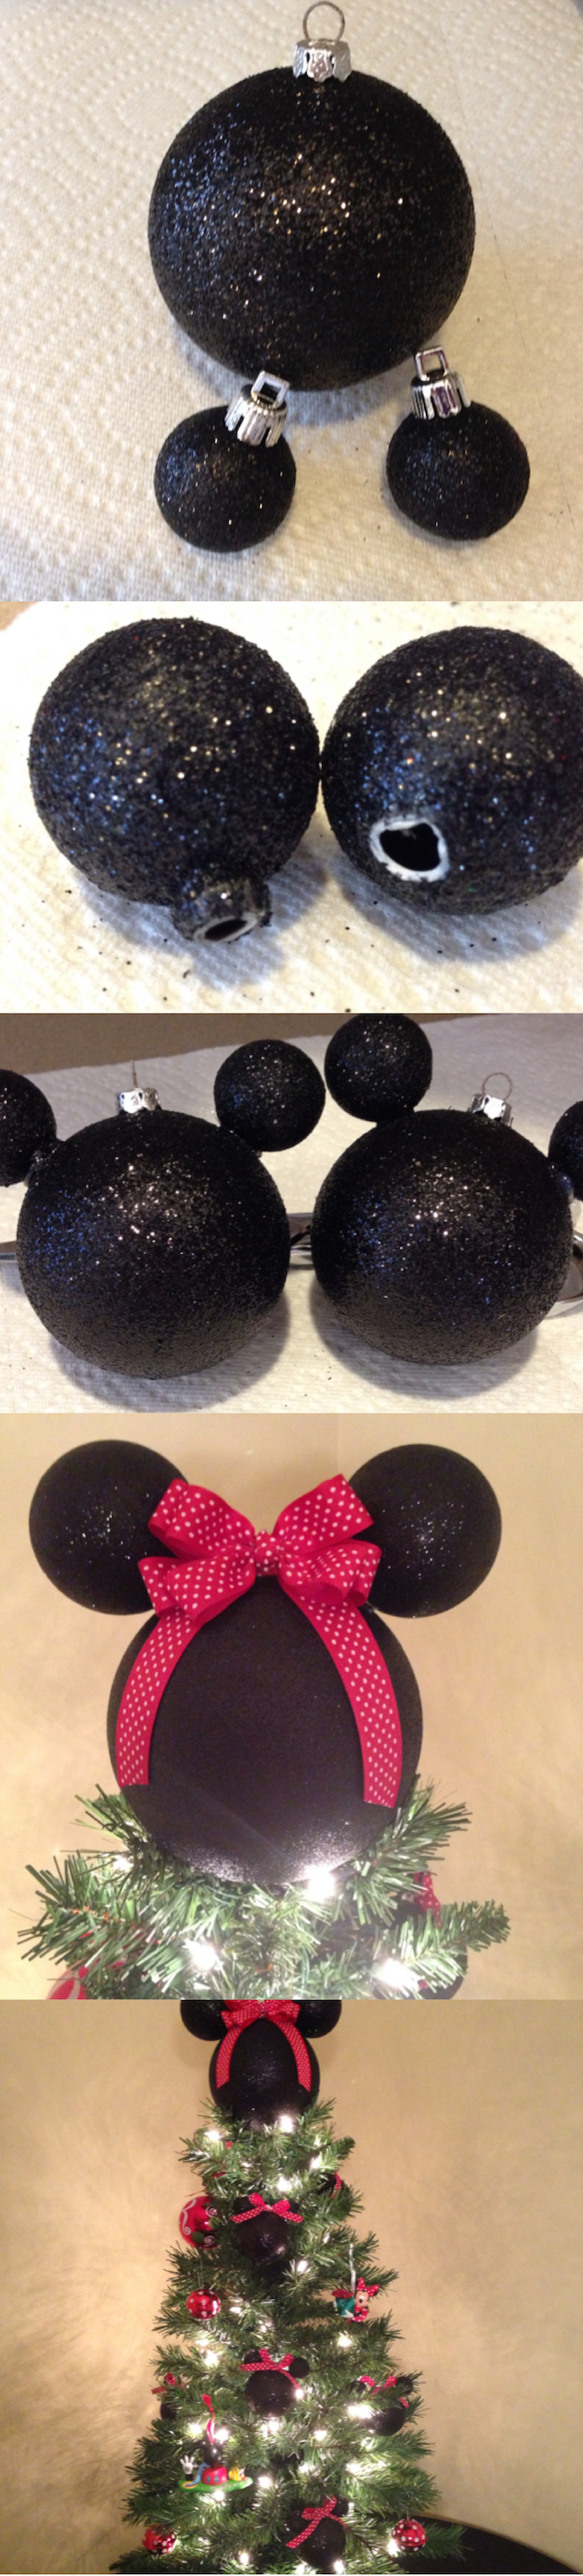 DIY Disney Ornaments and Christmas Tree Topper